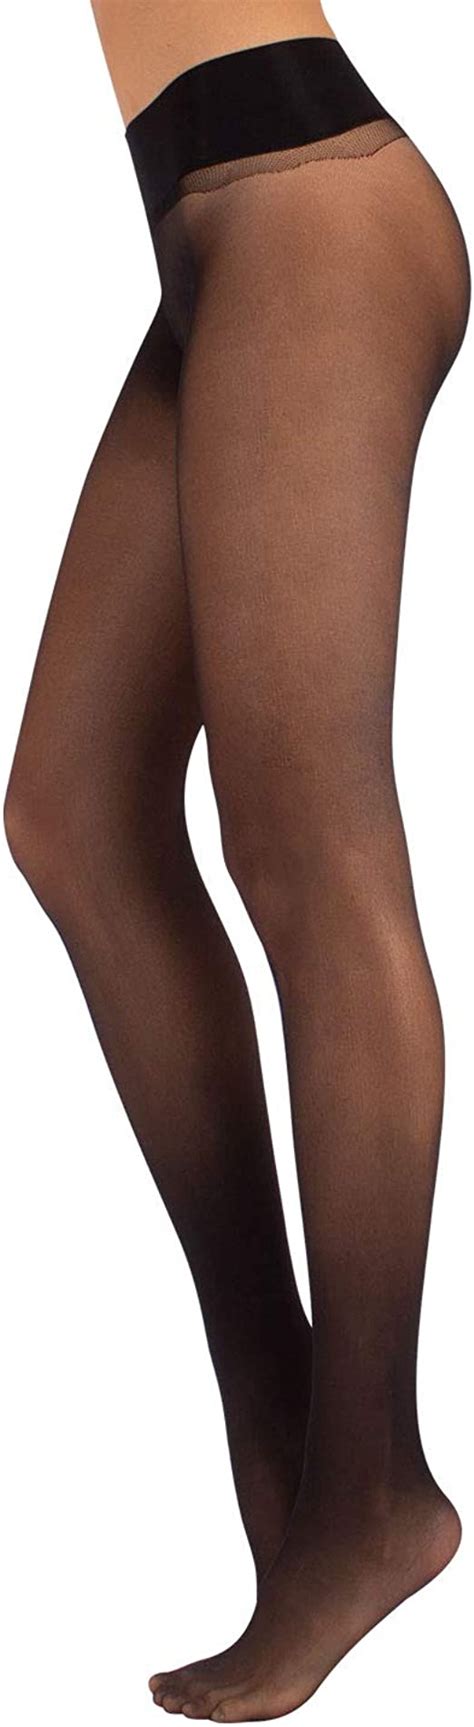 Calzitaly Seamless Sheer Tights Plain Or With Polka Dots Black Skin Blue S Ml Lxl 15